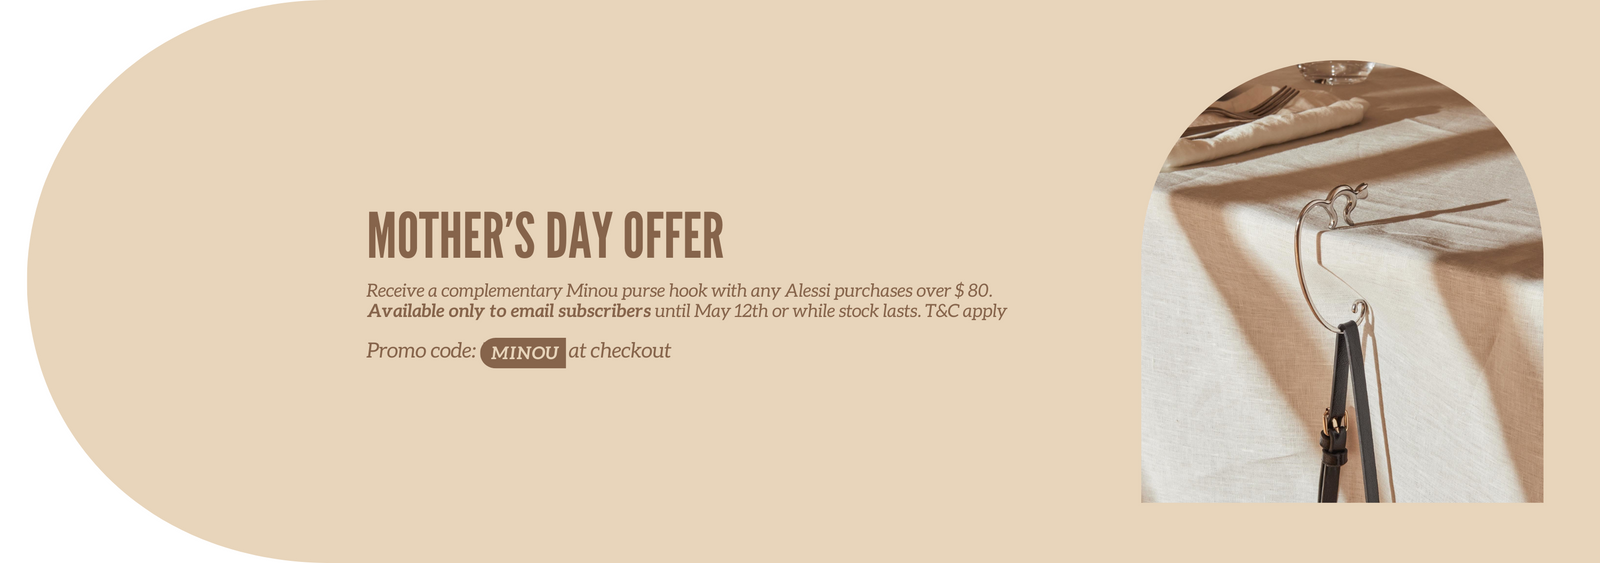 Mothers Day Alessi Promo 